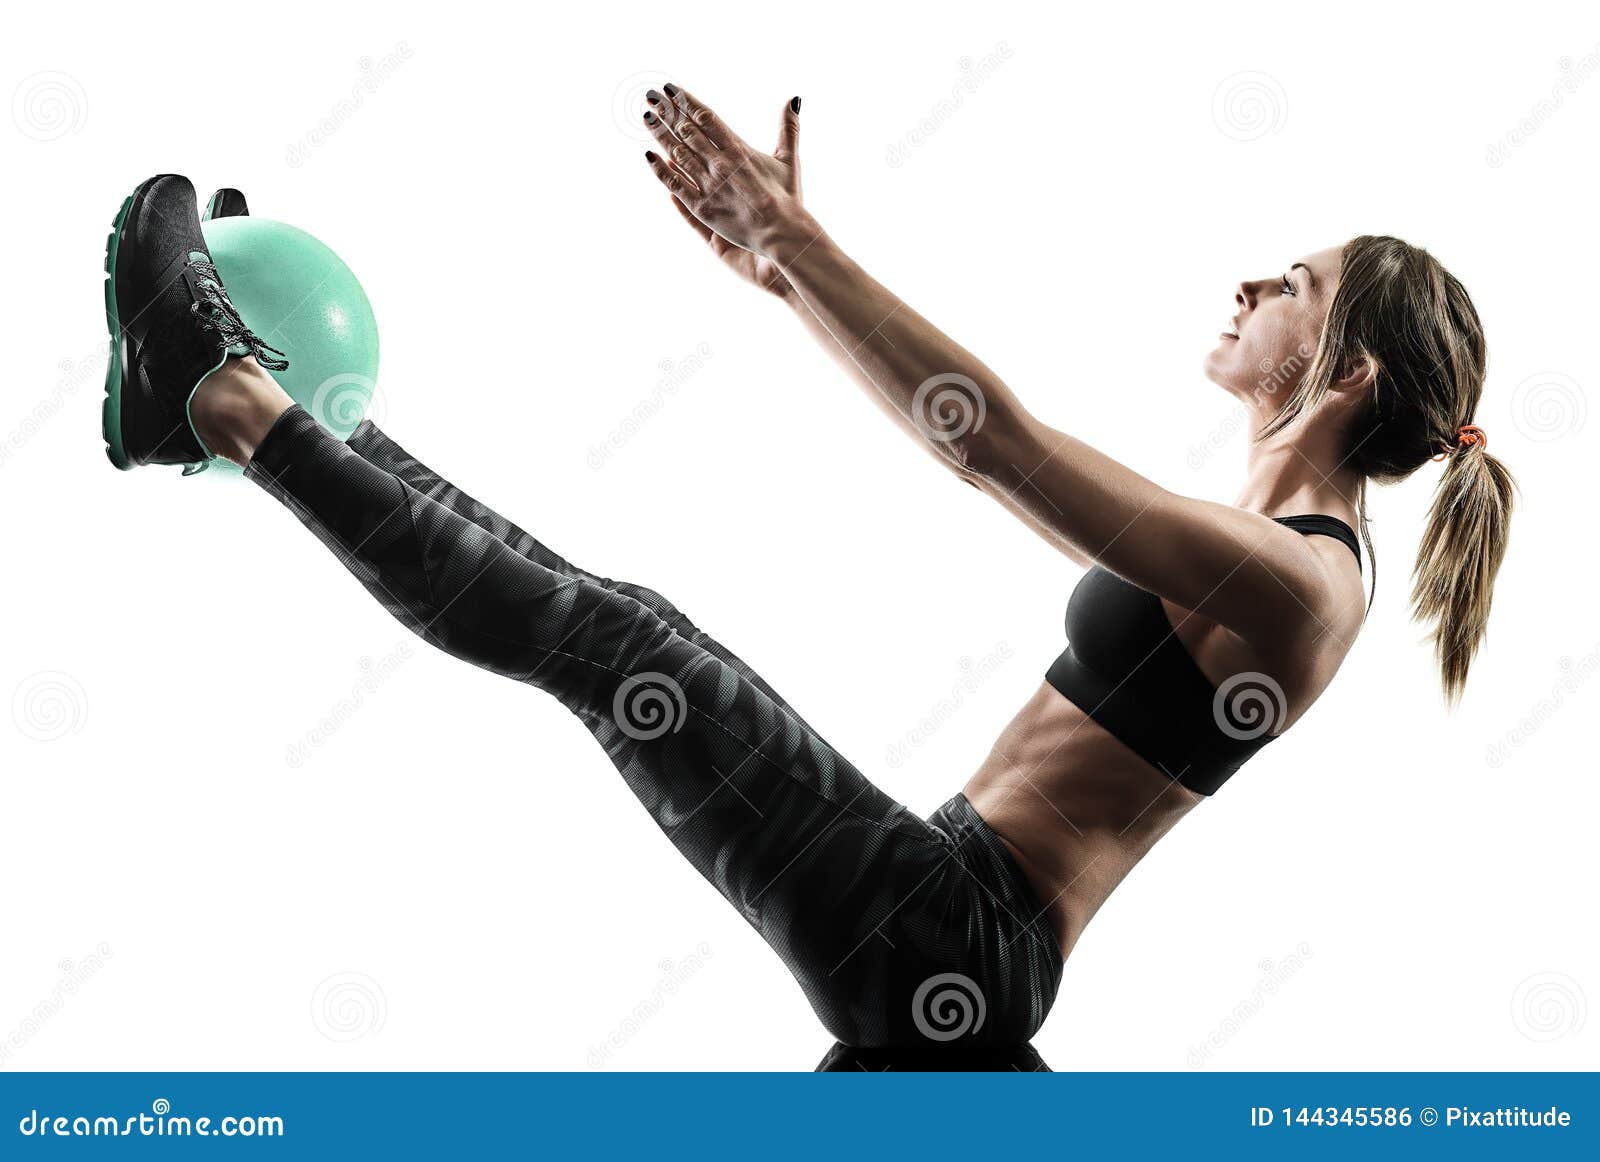 Woman Pilates Fitness Soft Ball Exercises Silhouette Stock Image - Image of girl, exercises 